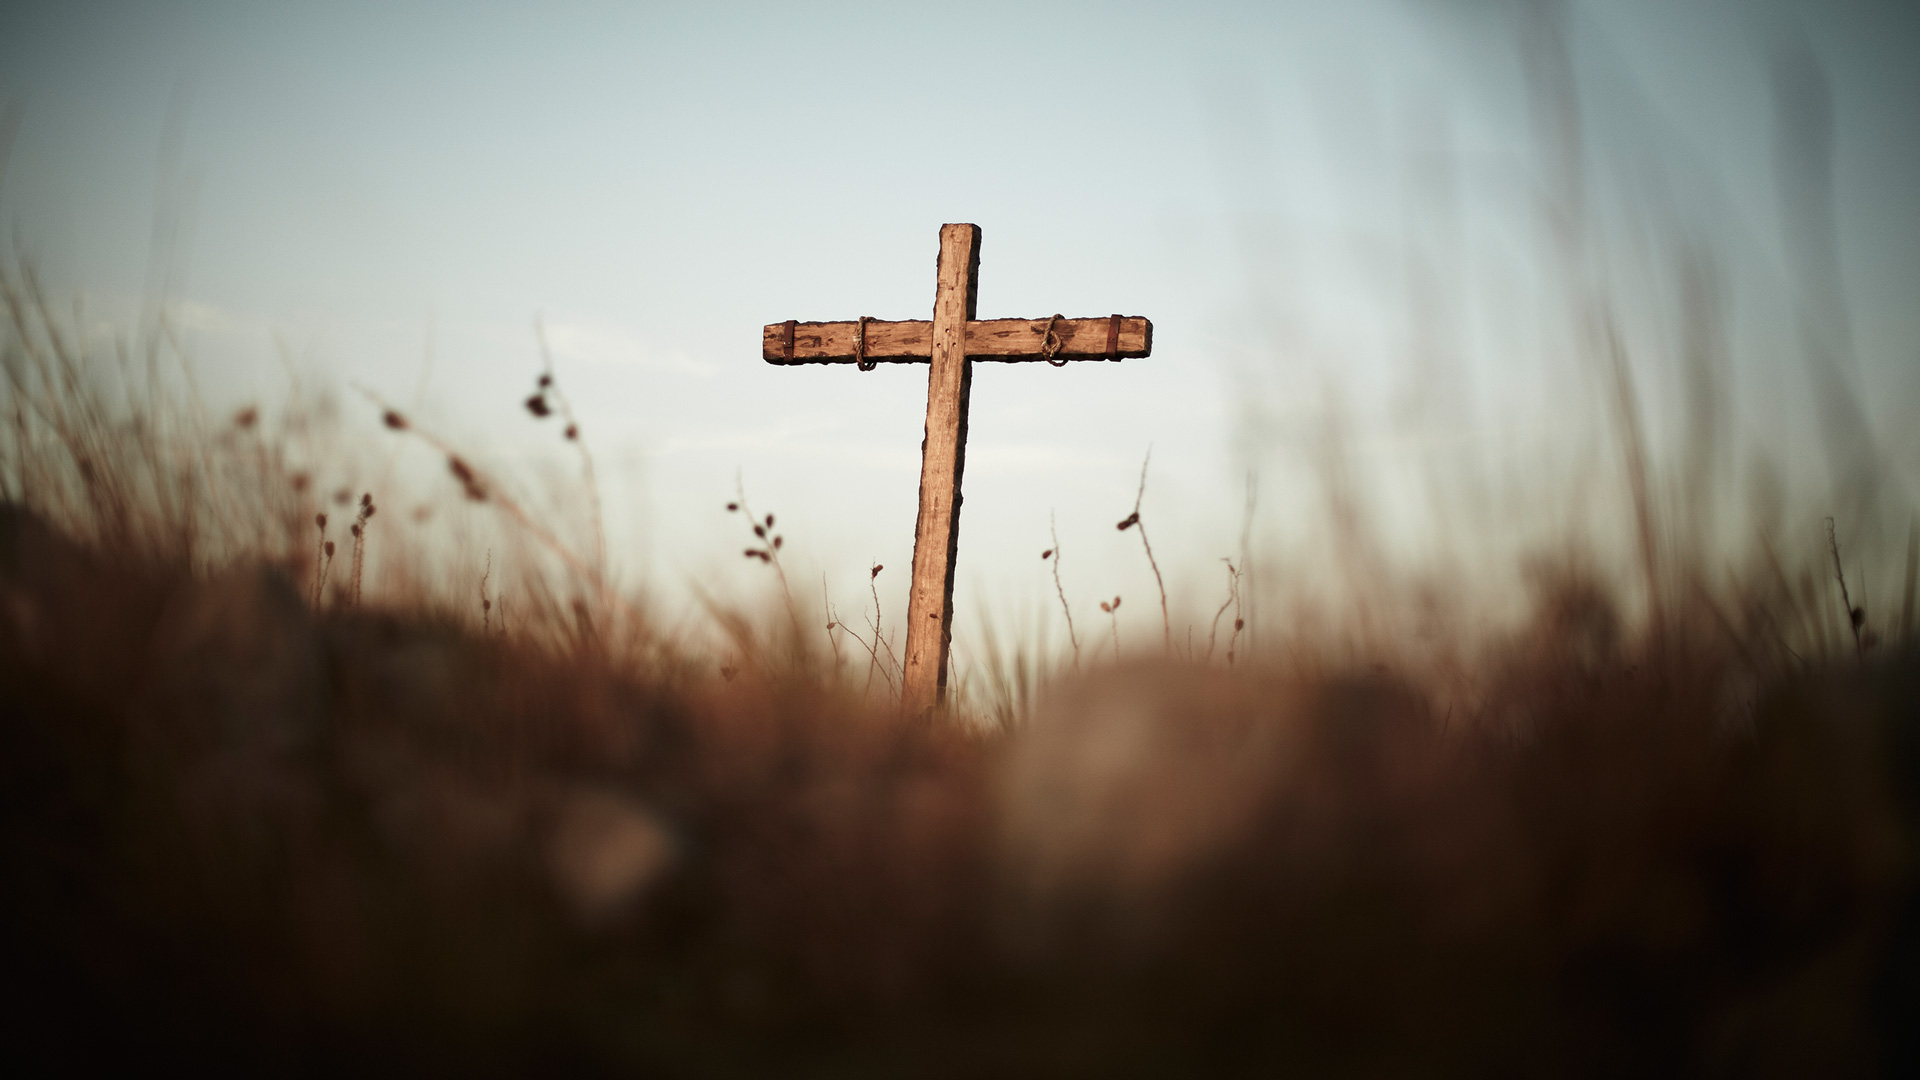 Wednesday Wallpaper: Take Me to the Cross and Leave Me There